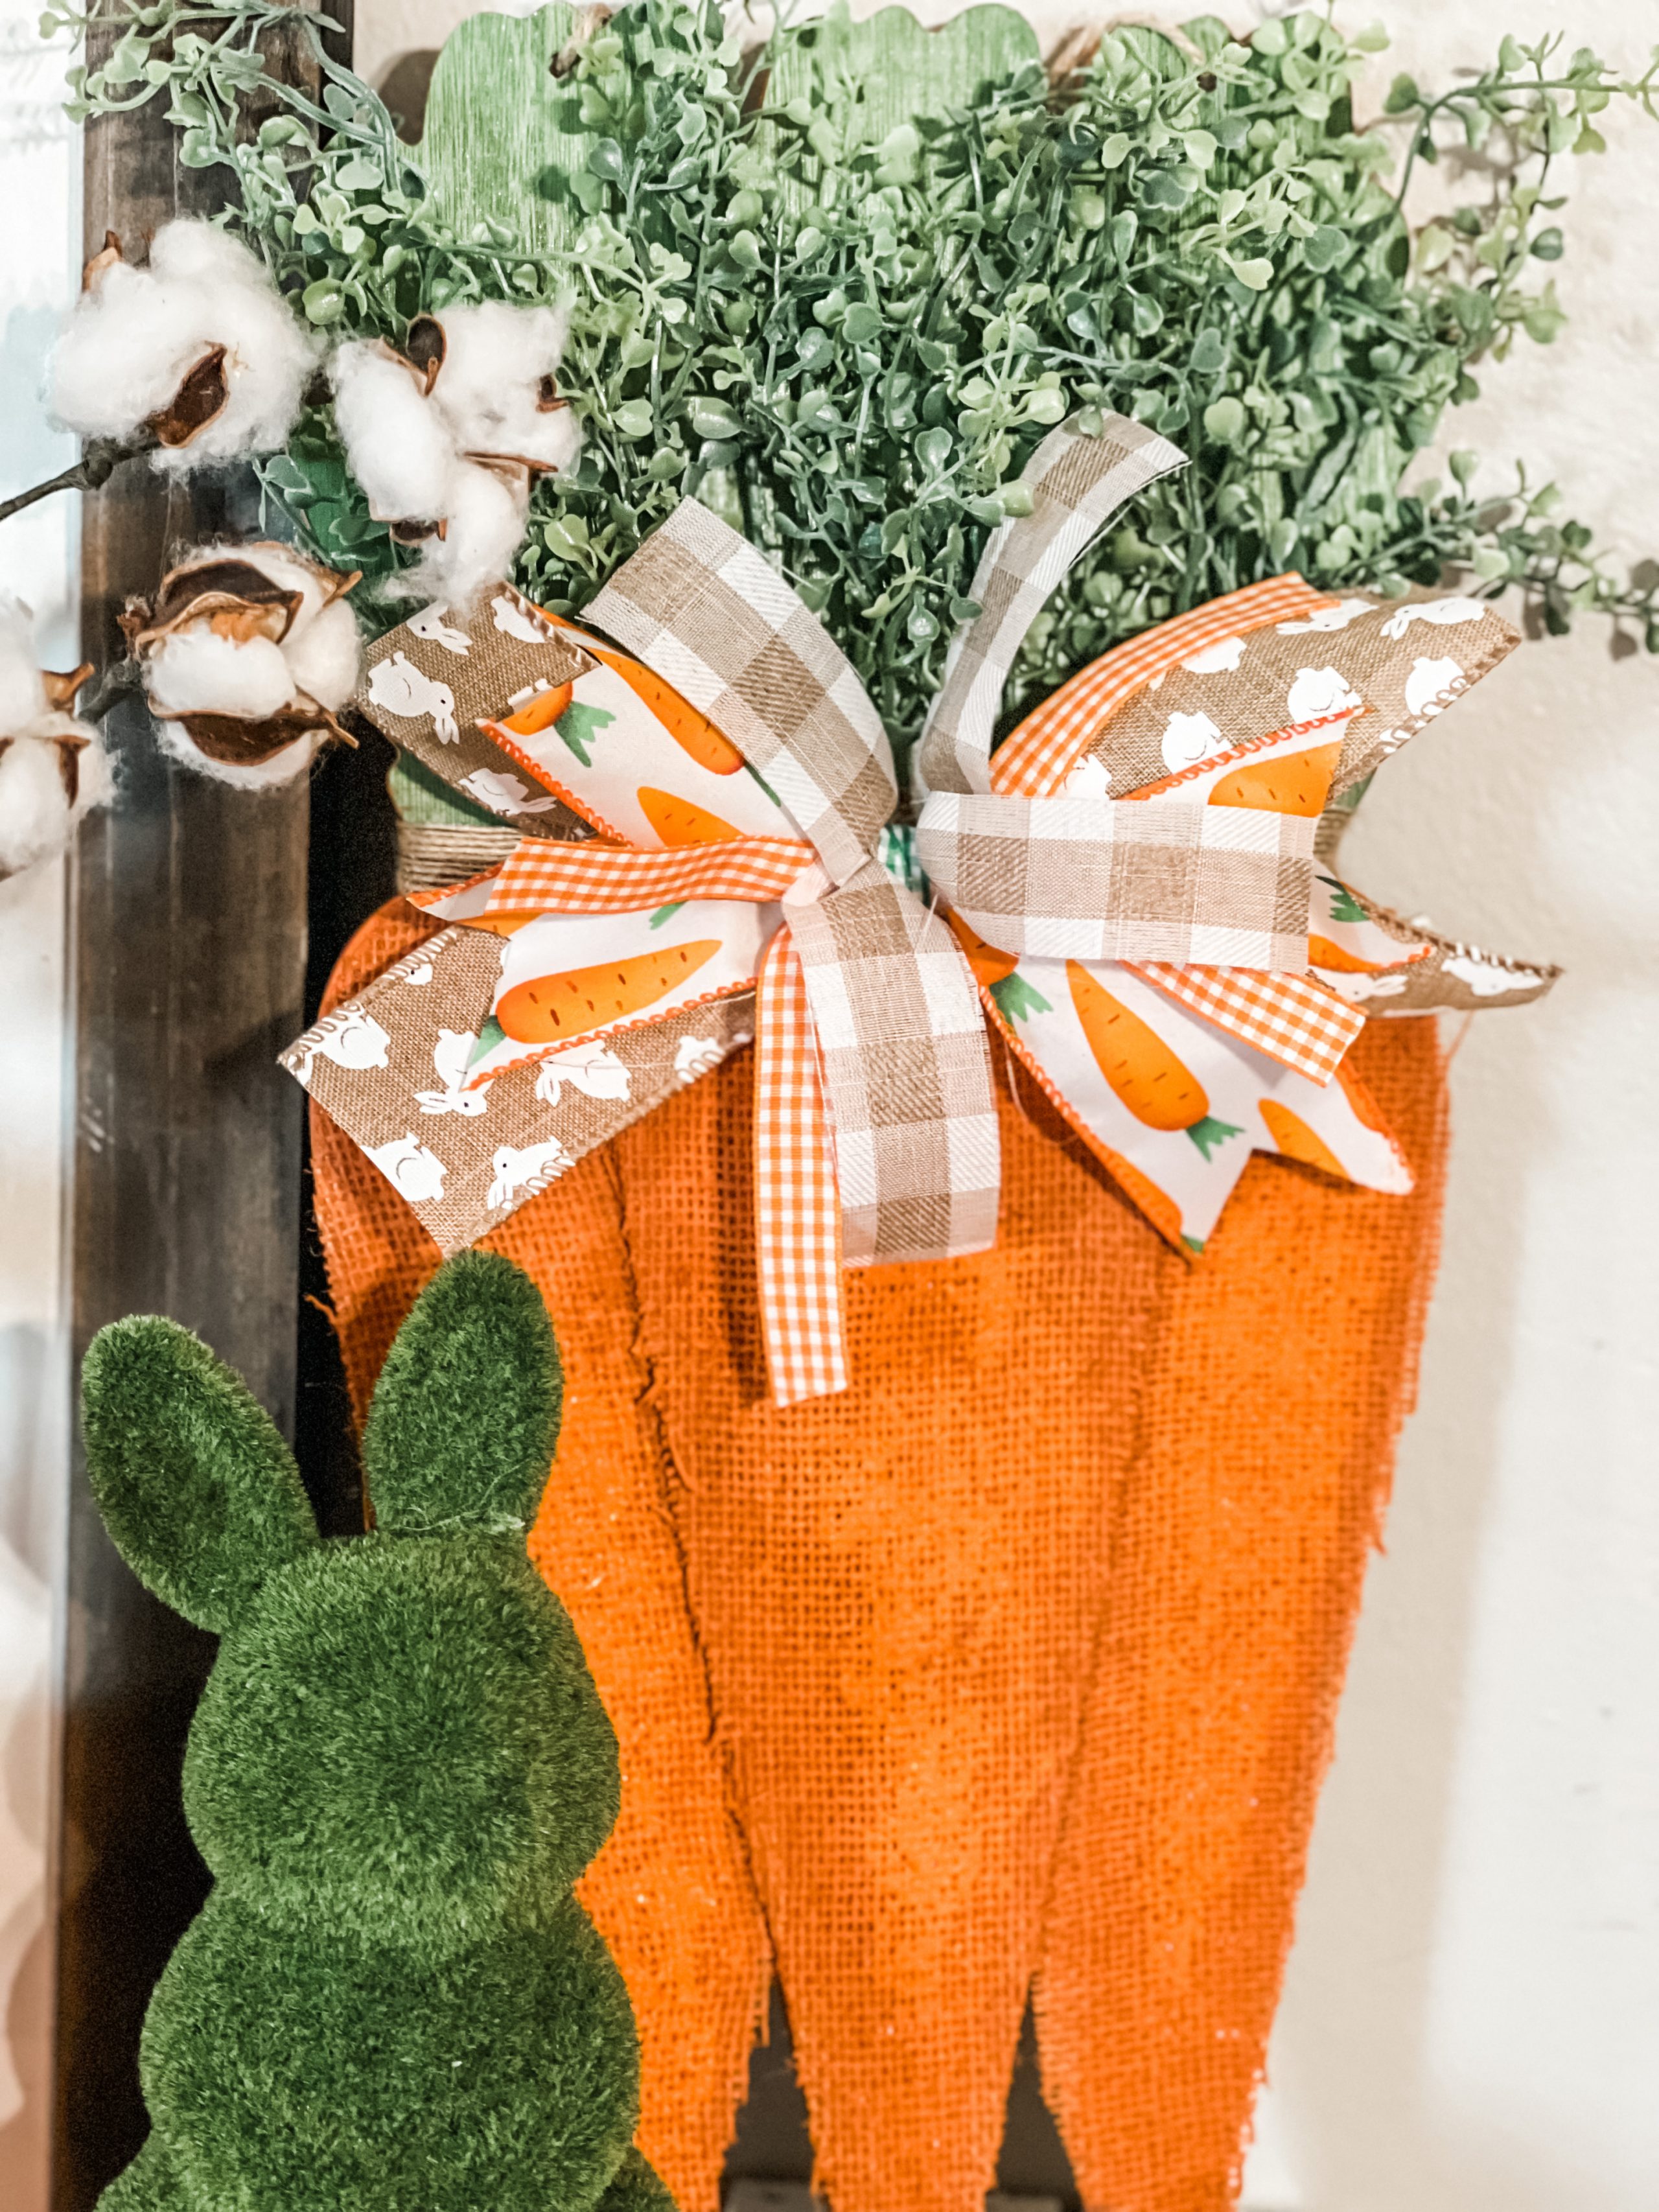 diy dollar tree carrot makeover - Re-Fabbed